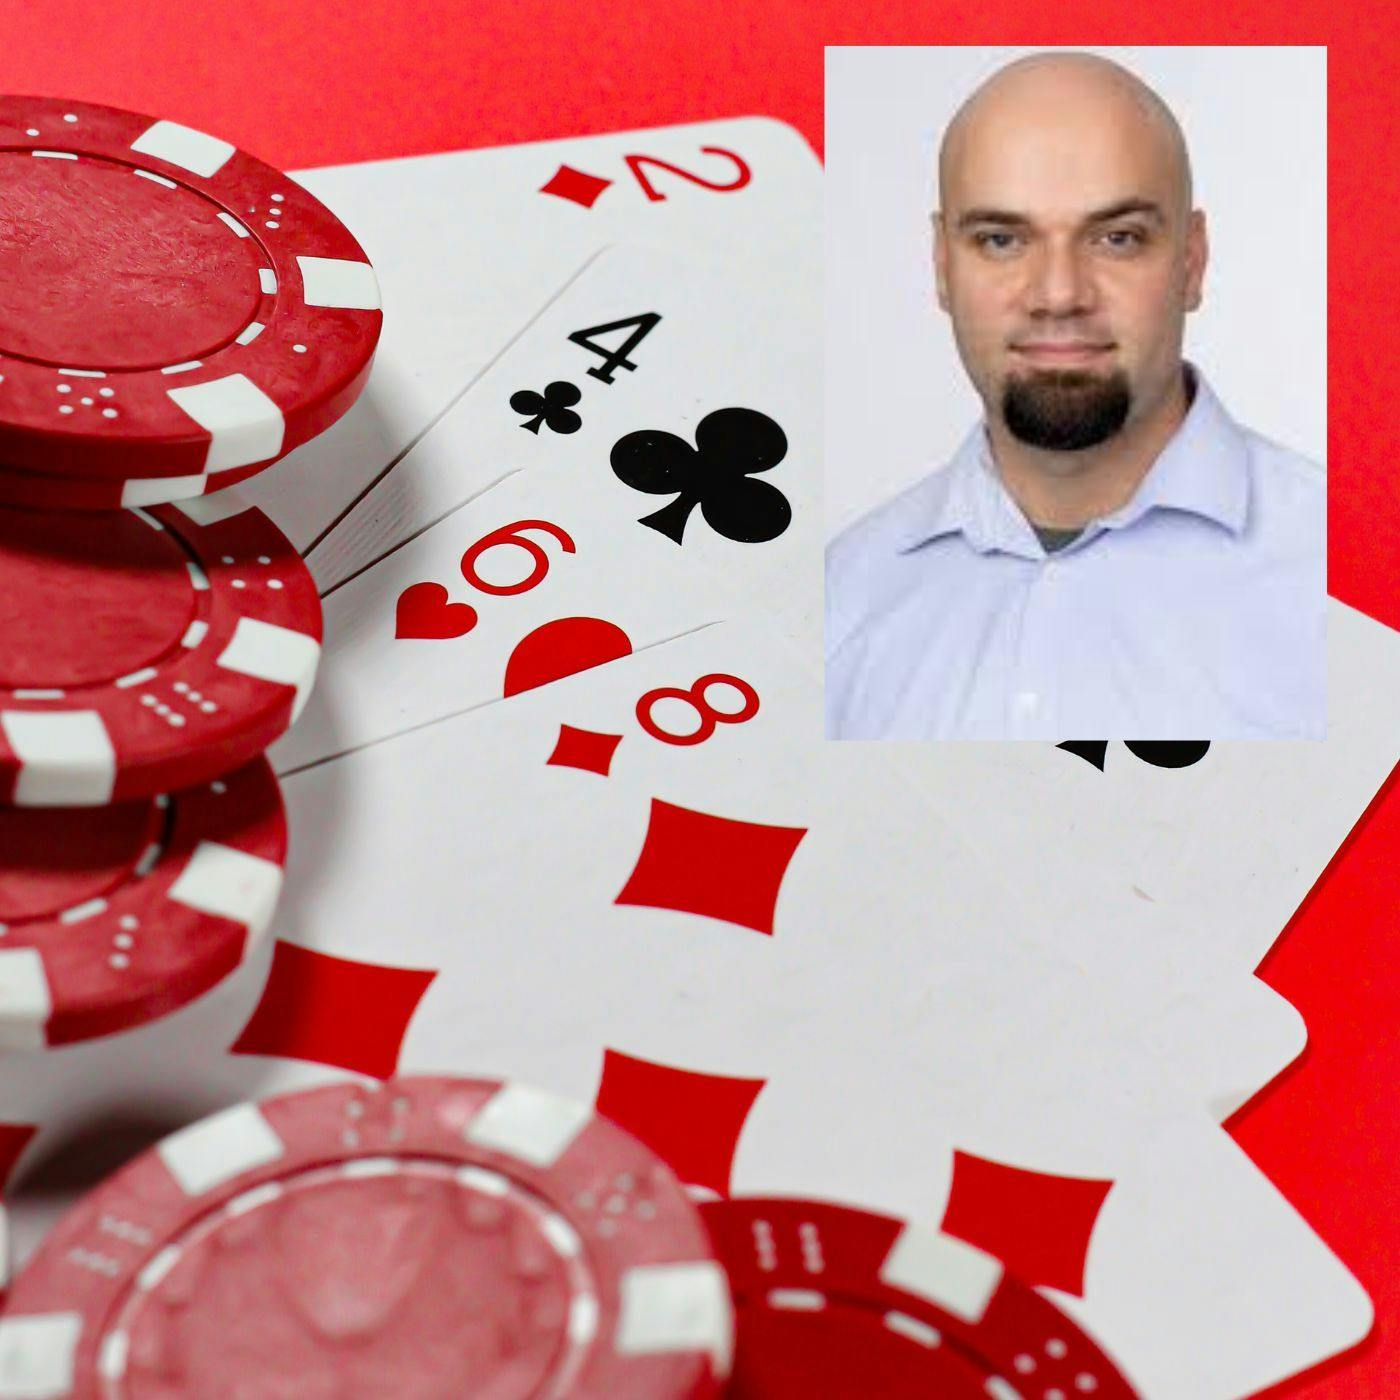 Gambling and Sex Addiction Researcher Dr. Joshua Grubbs